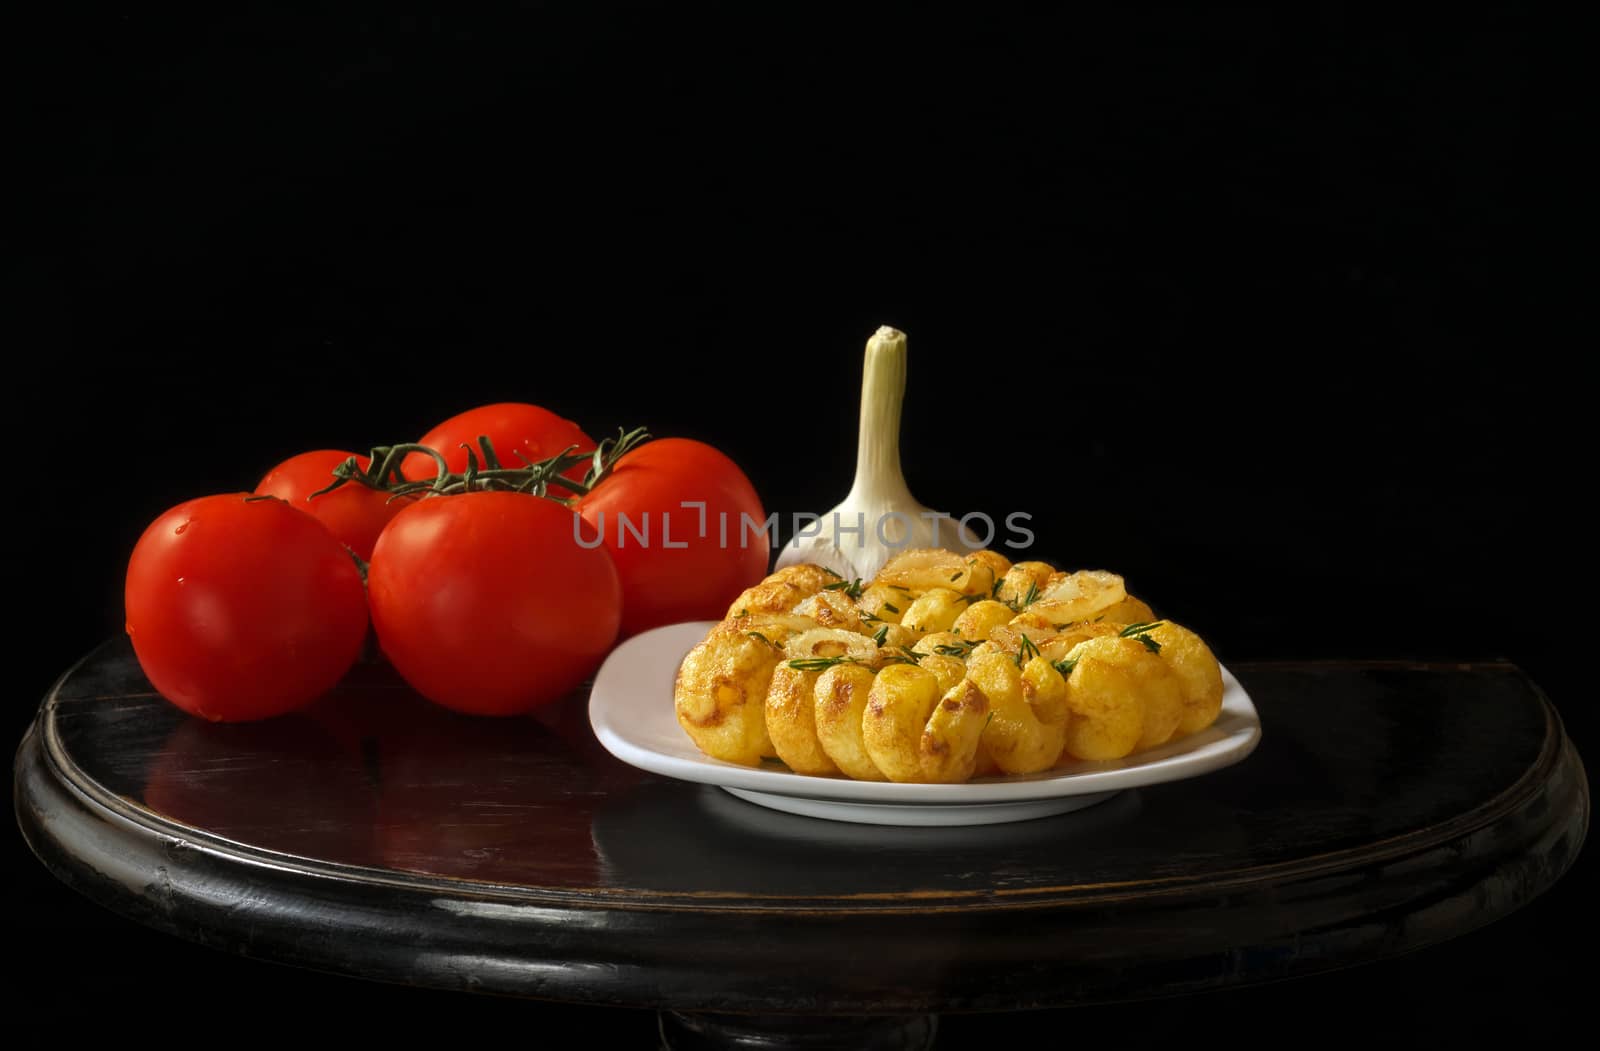 Roasted potatoes, garlic and tomatoes, black vintage table and black background.